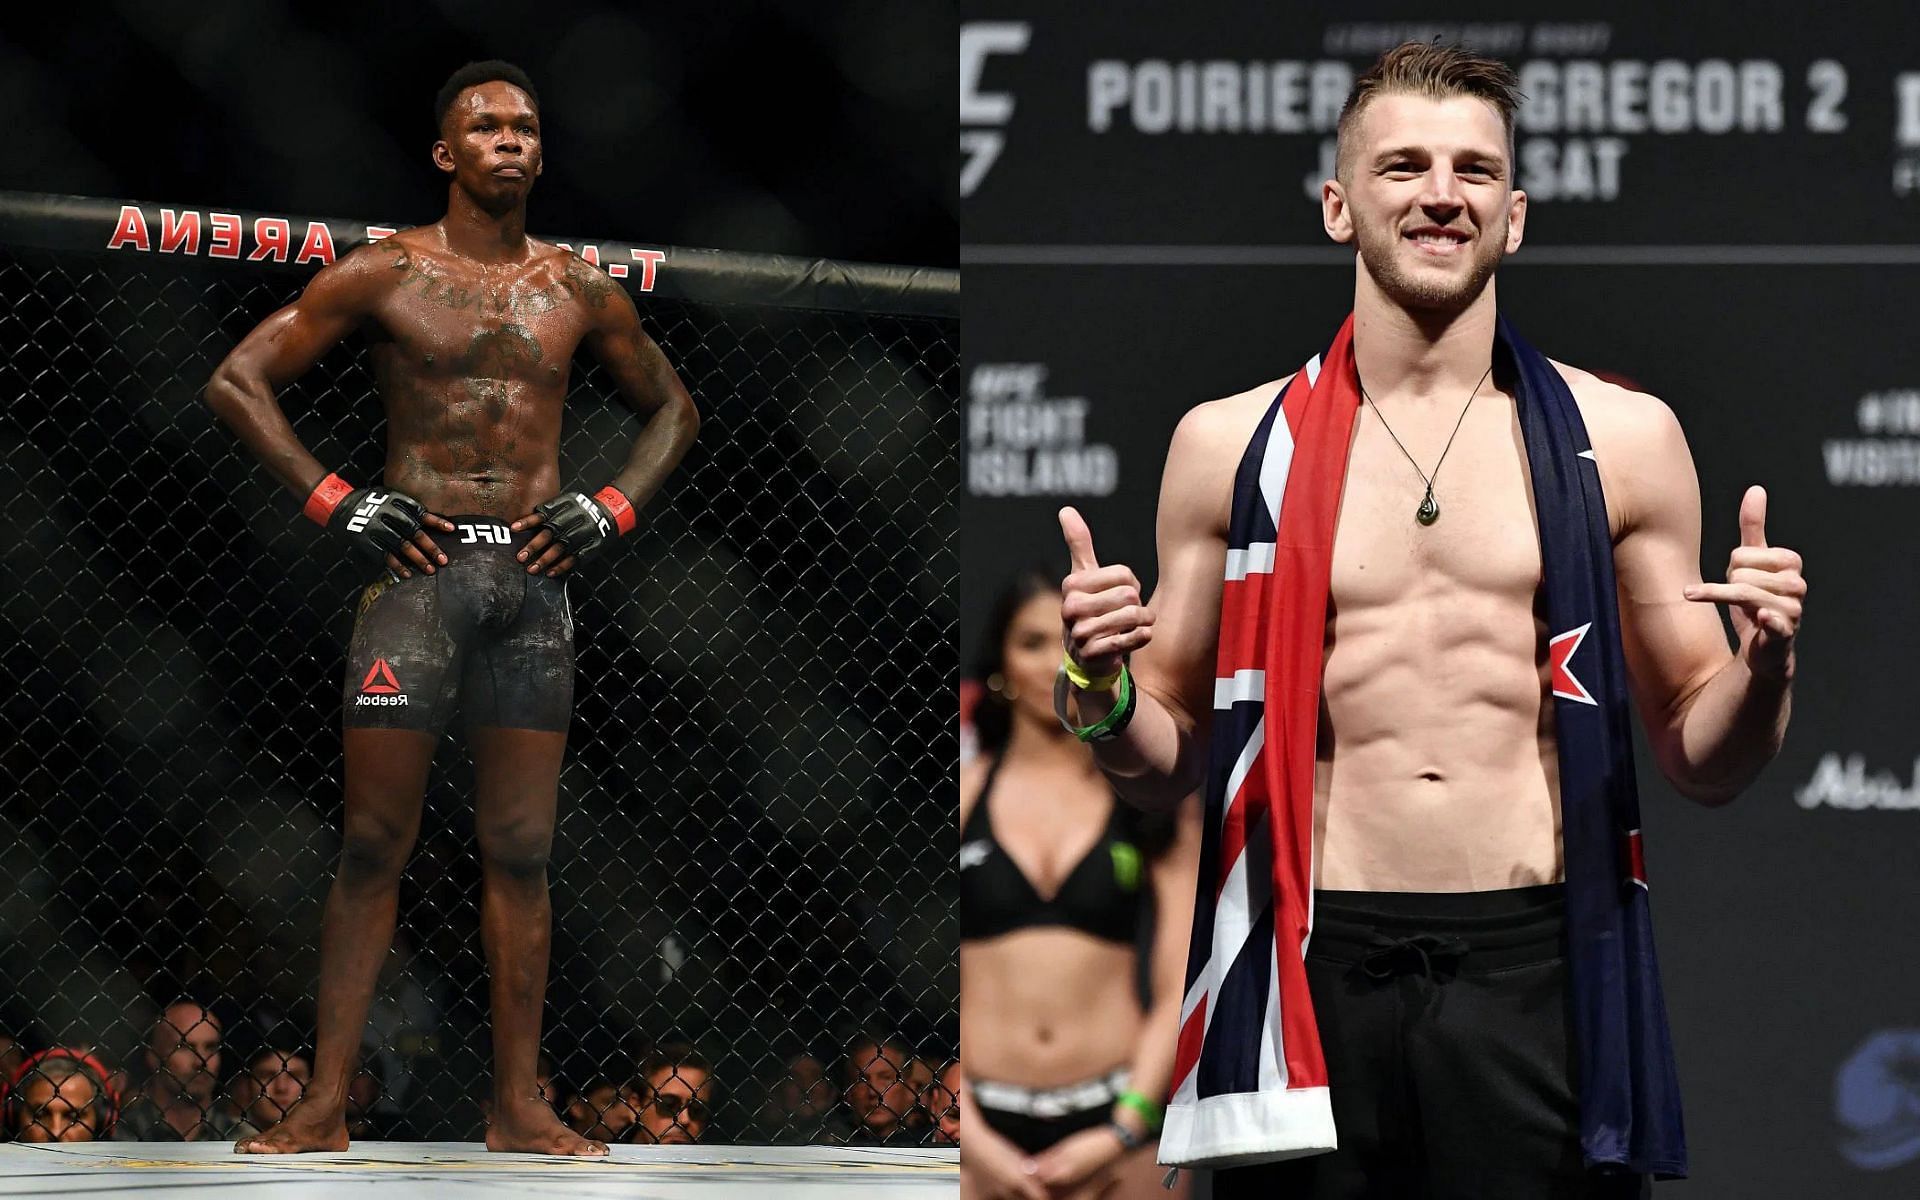 Israel Adesanya (Left) and Dan Hooker (Right) (Images courtesy of Getty)